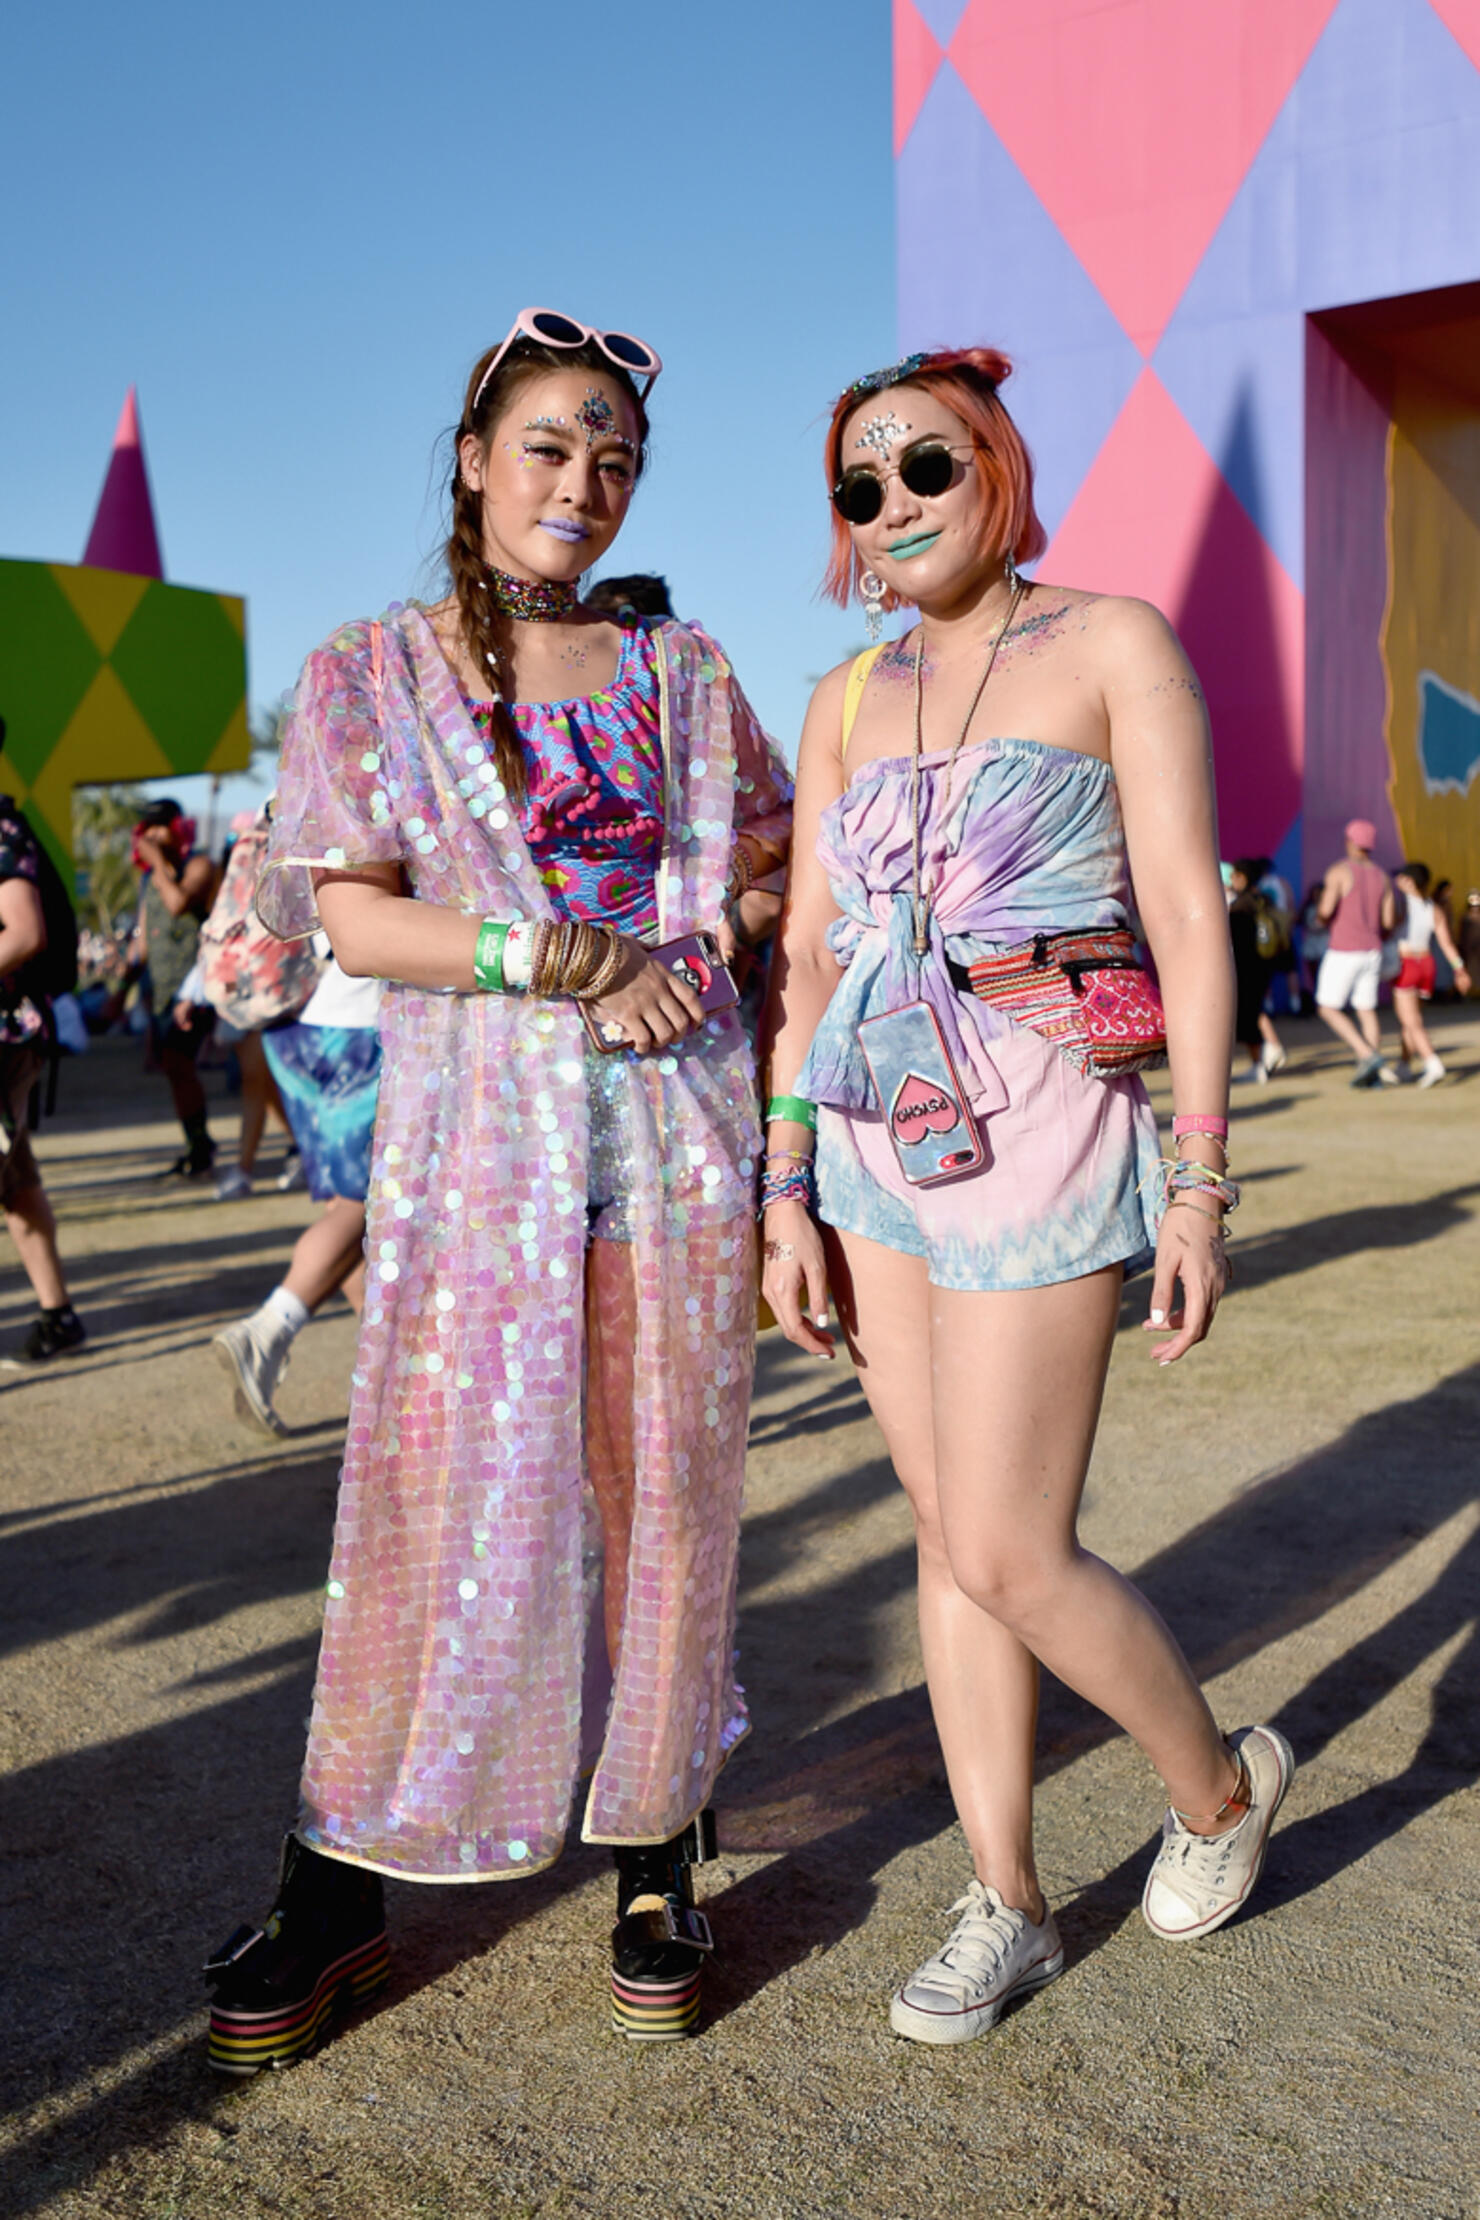 Street Style At The 2017 Coachella Valley Music And Arts Festival - Weekend 2